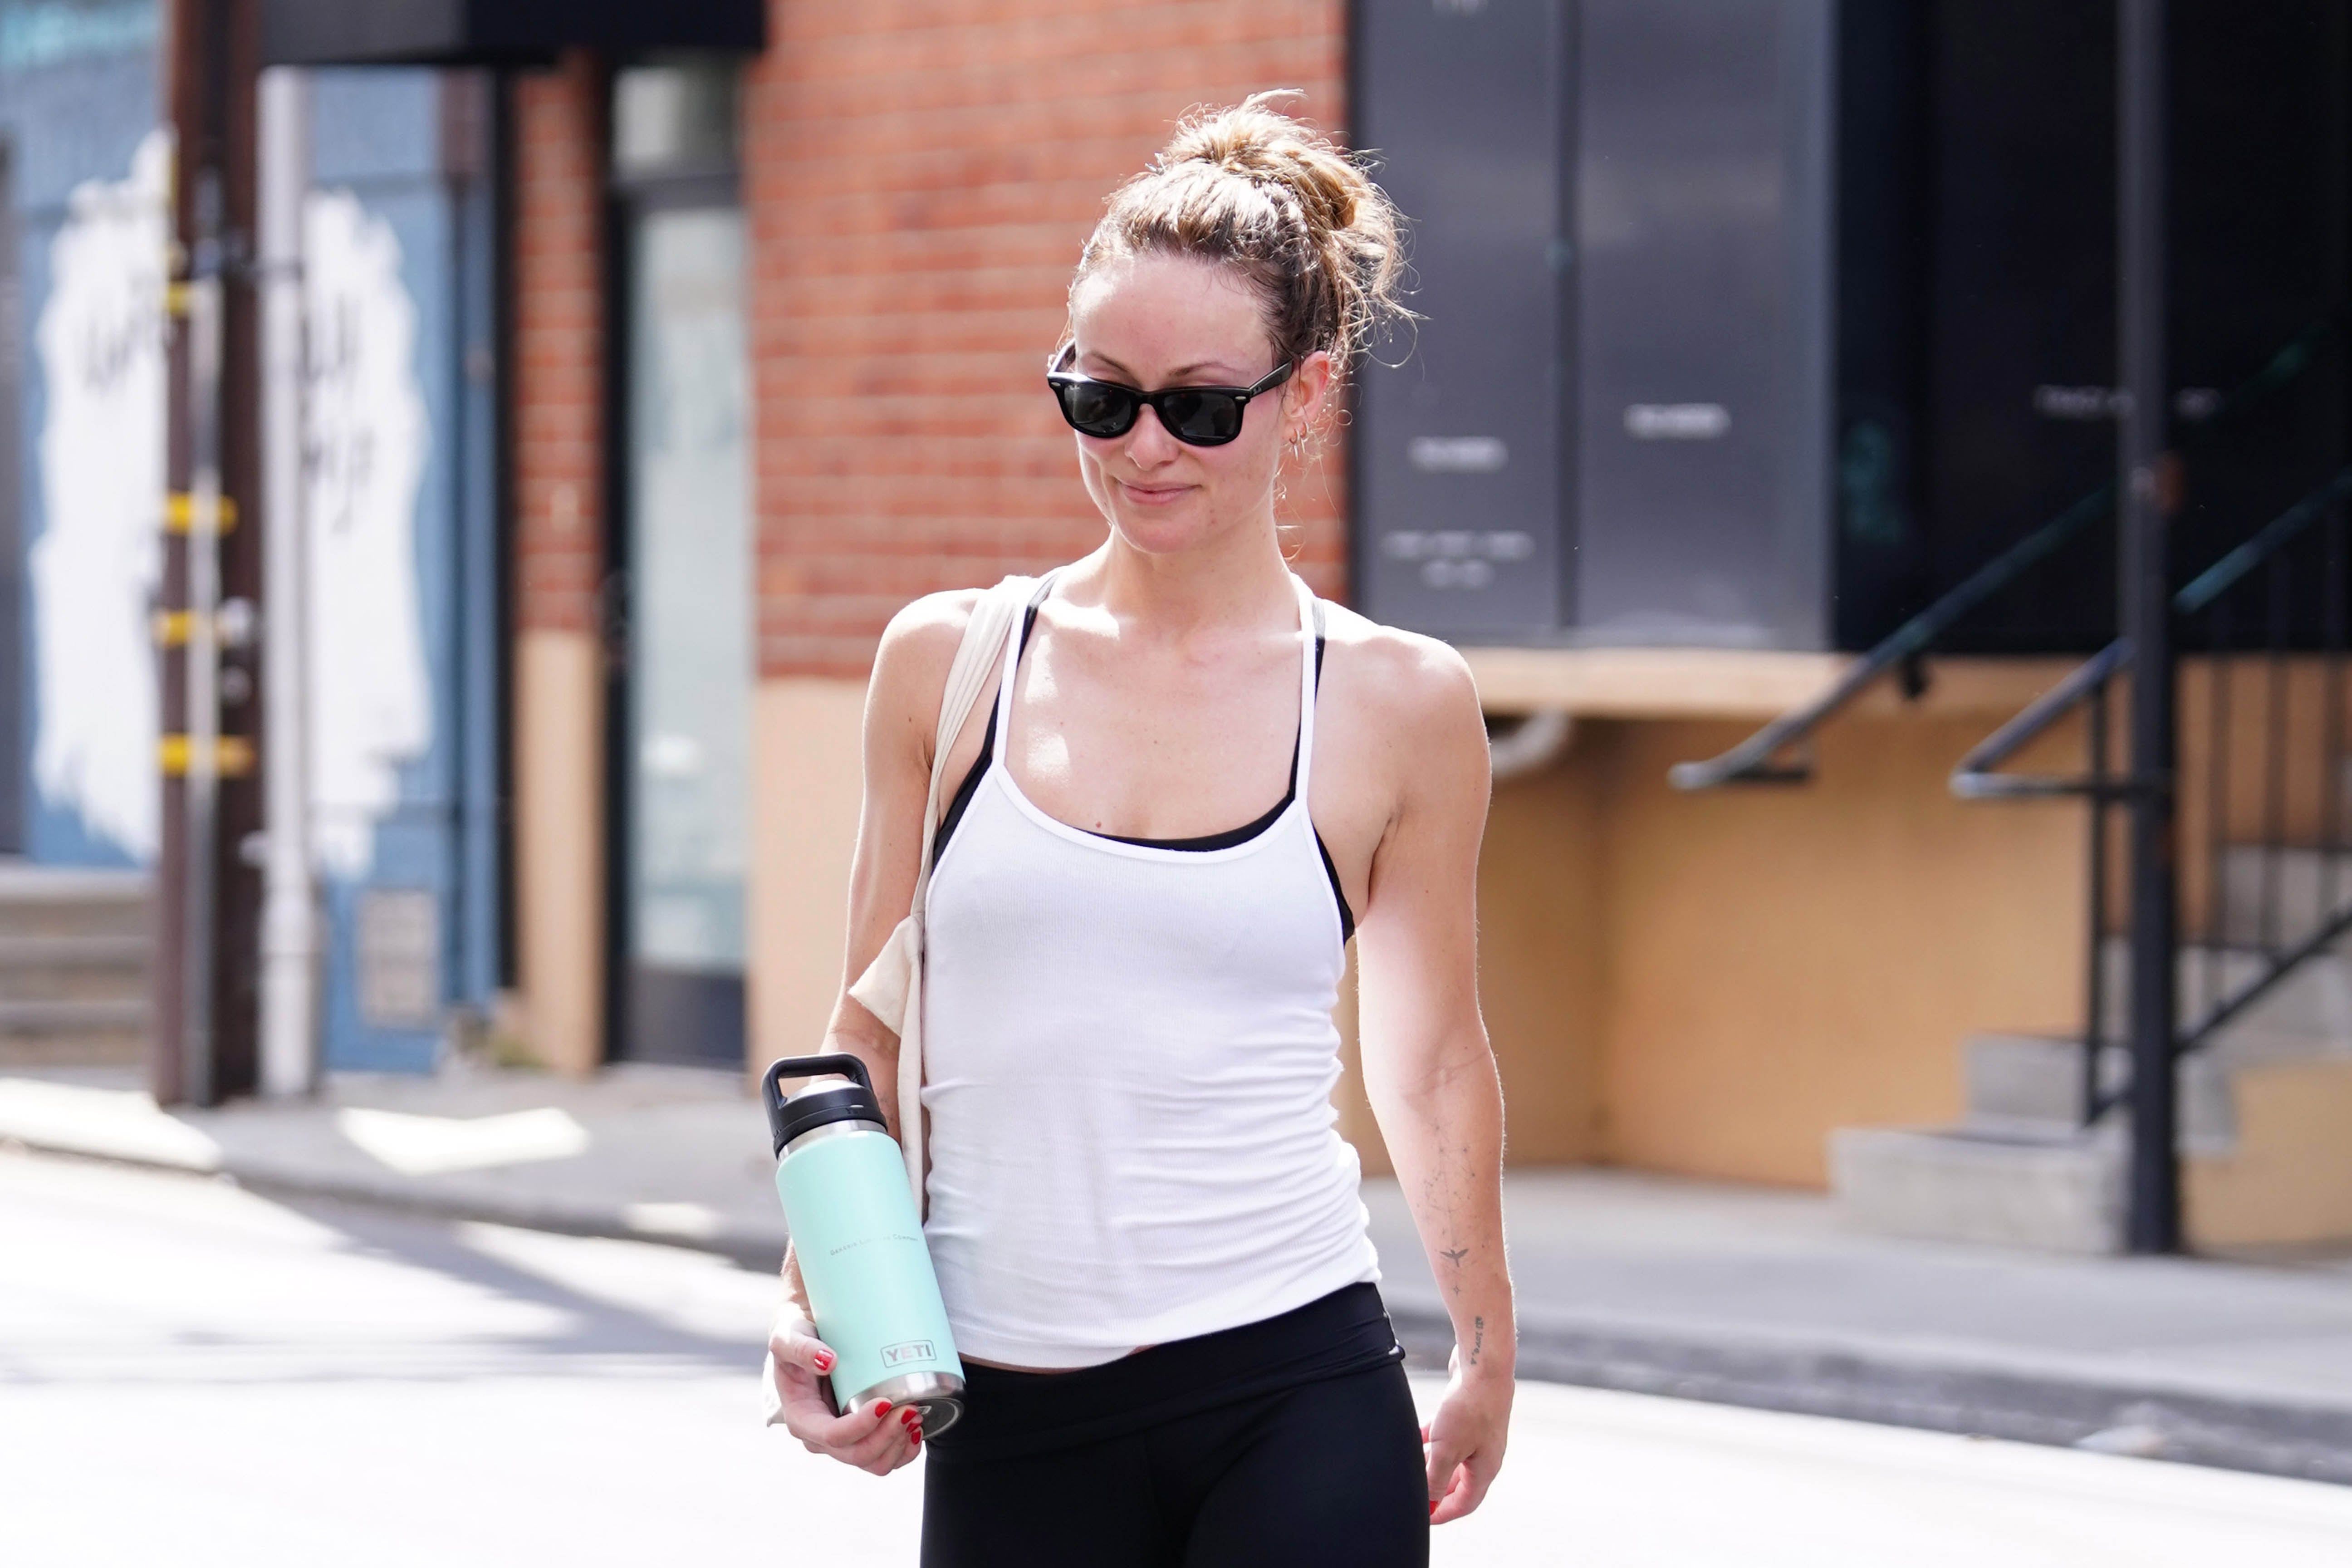 Olivia Wilde goes to the Tracy Anderson studio for her routine